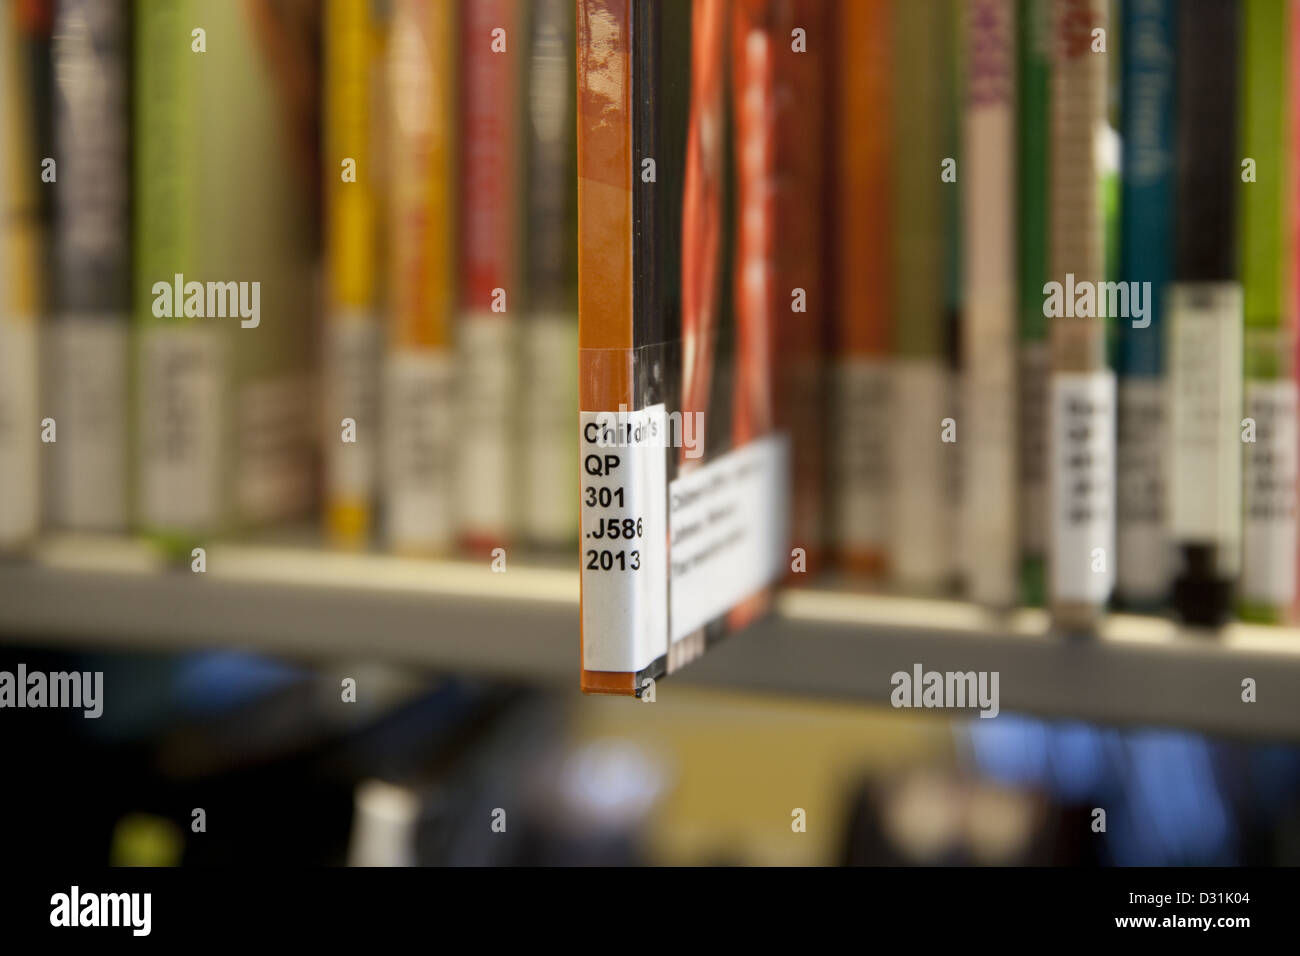 Library of Congress System call# label on the spine of a book in the children's section of a public library Stock Photo